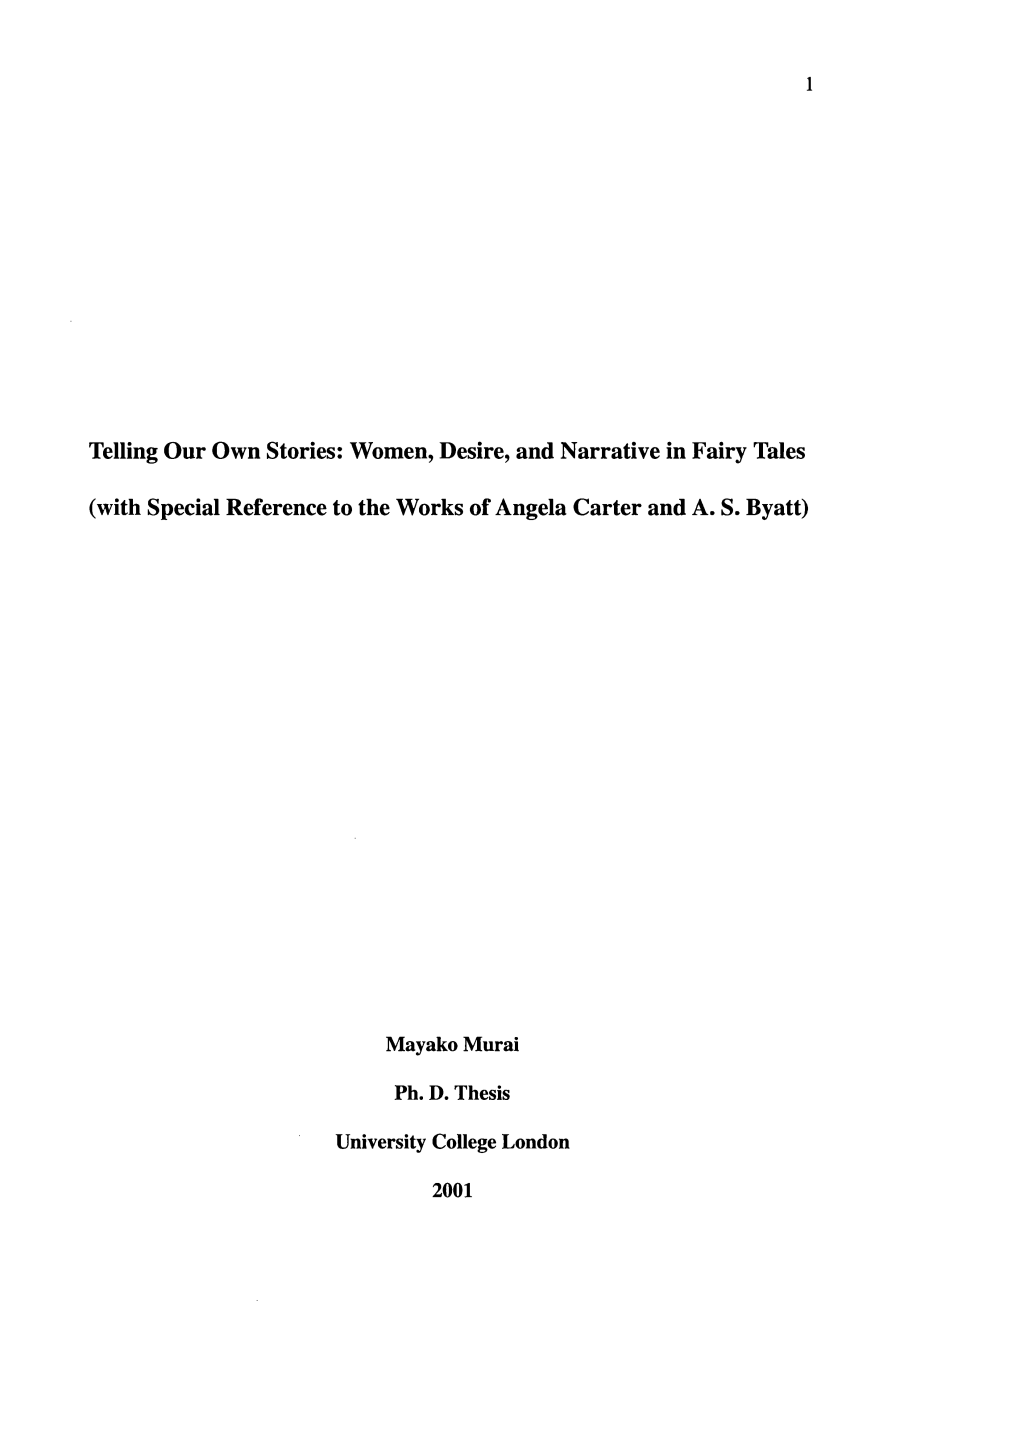 Telling Your Own Stories: Women, Desire, and Narrative in Fairy Tales